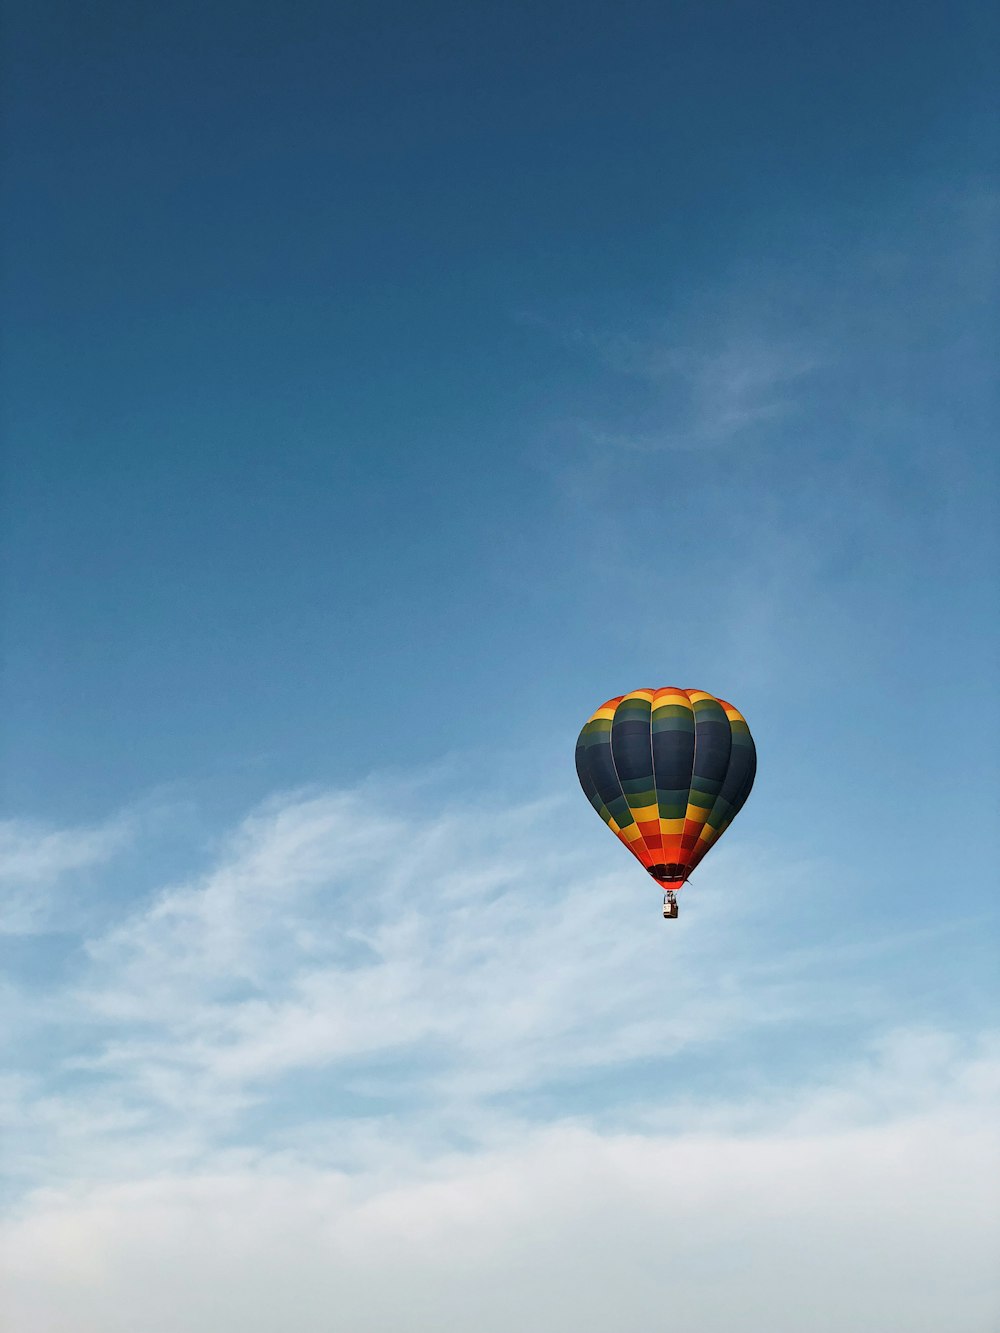 multicolored hot air balloon on cloudy sky